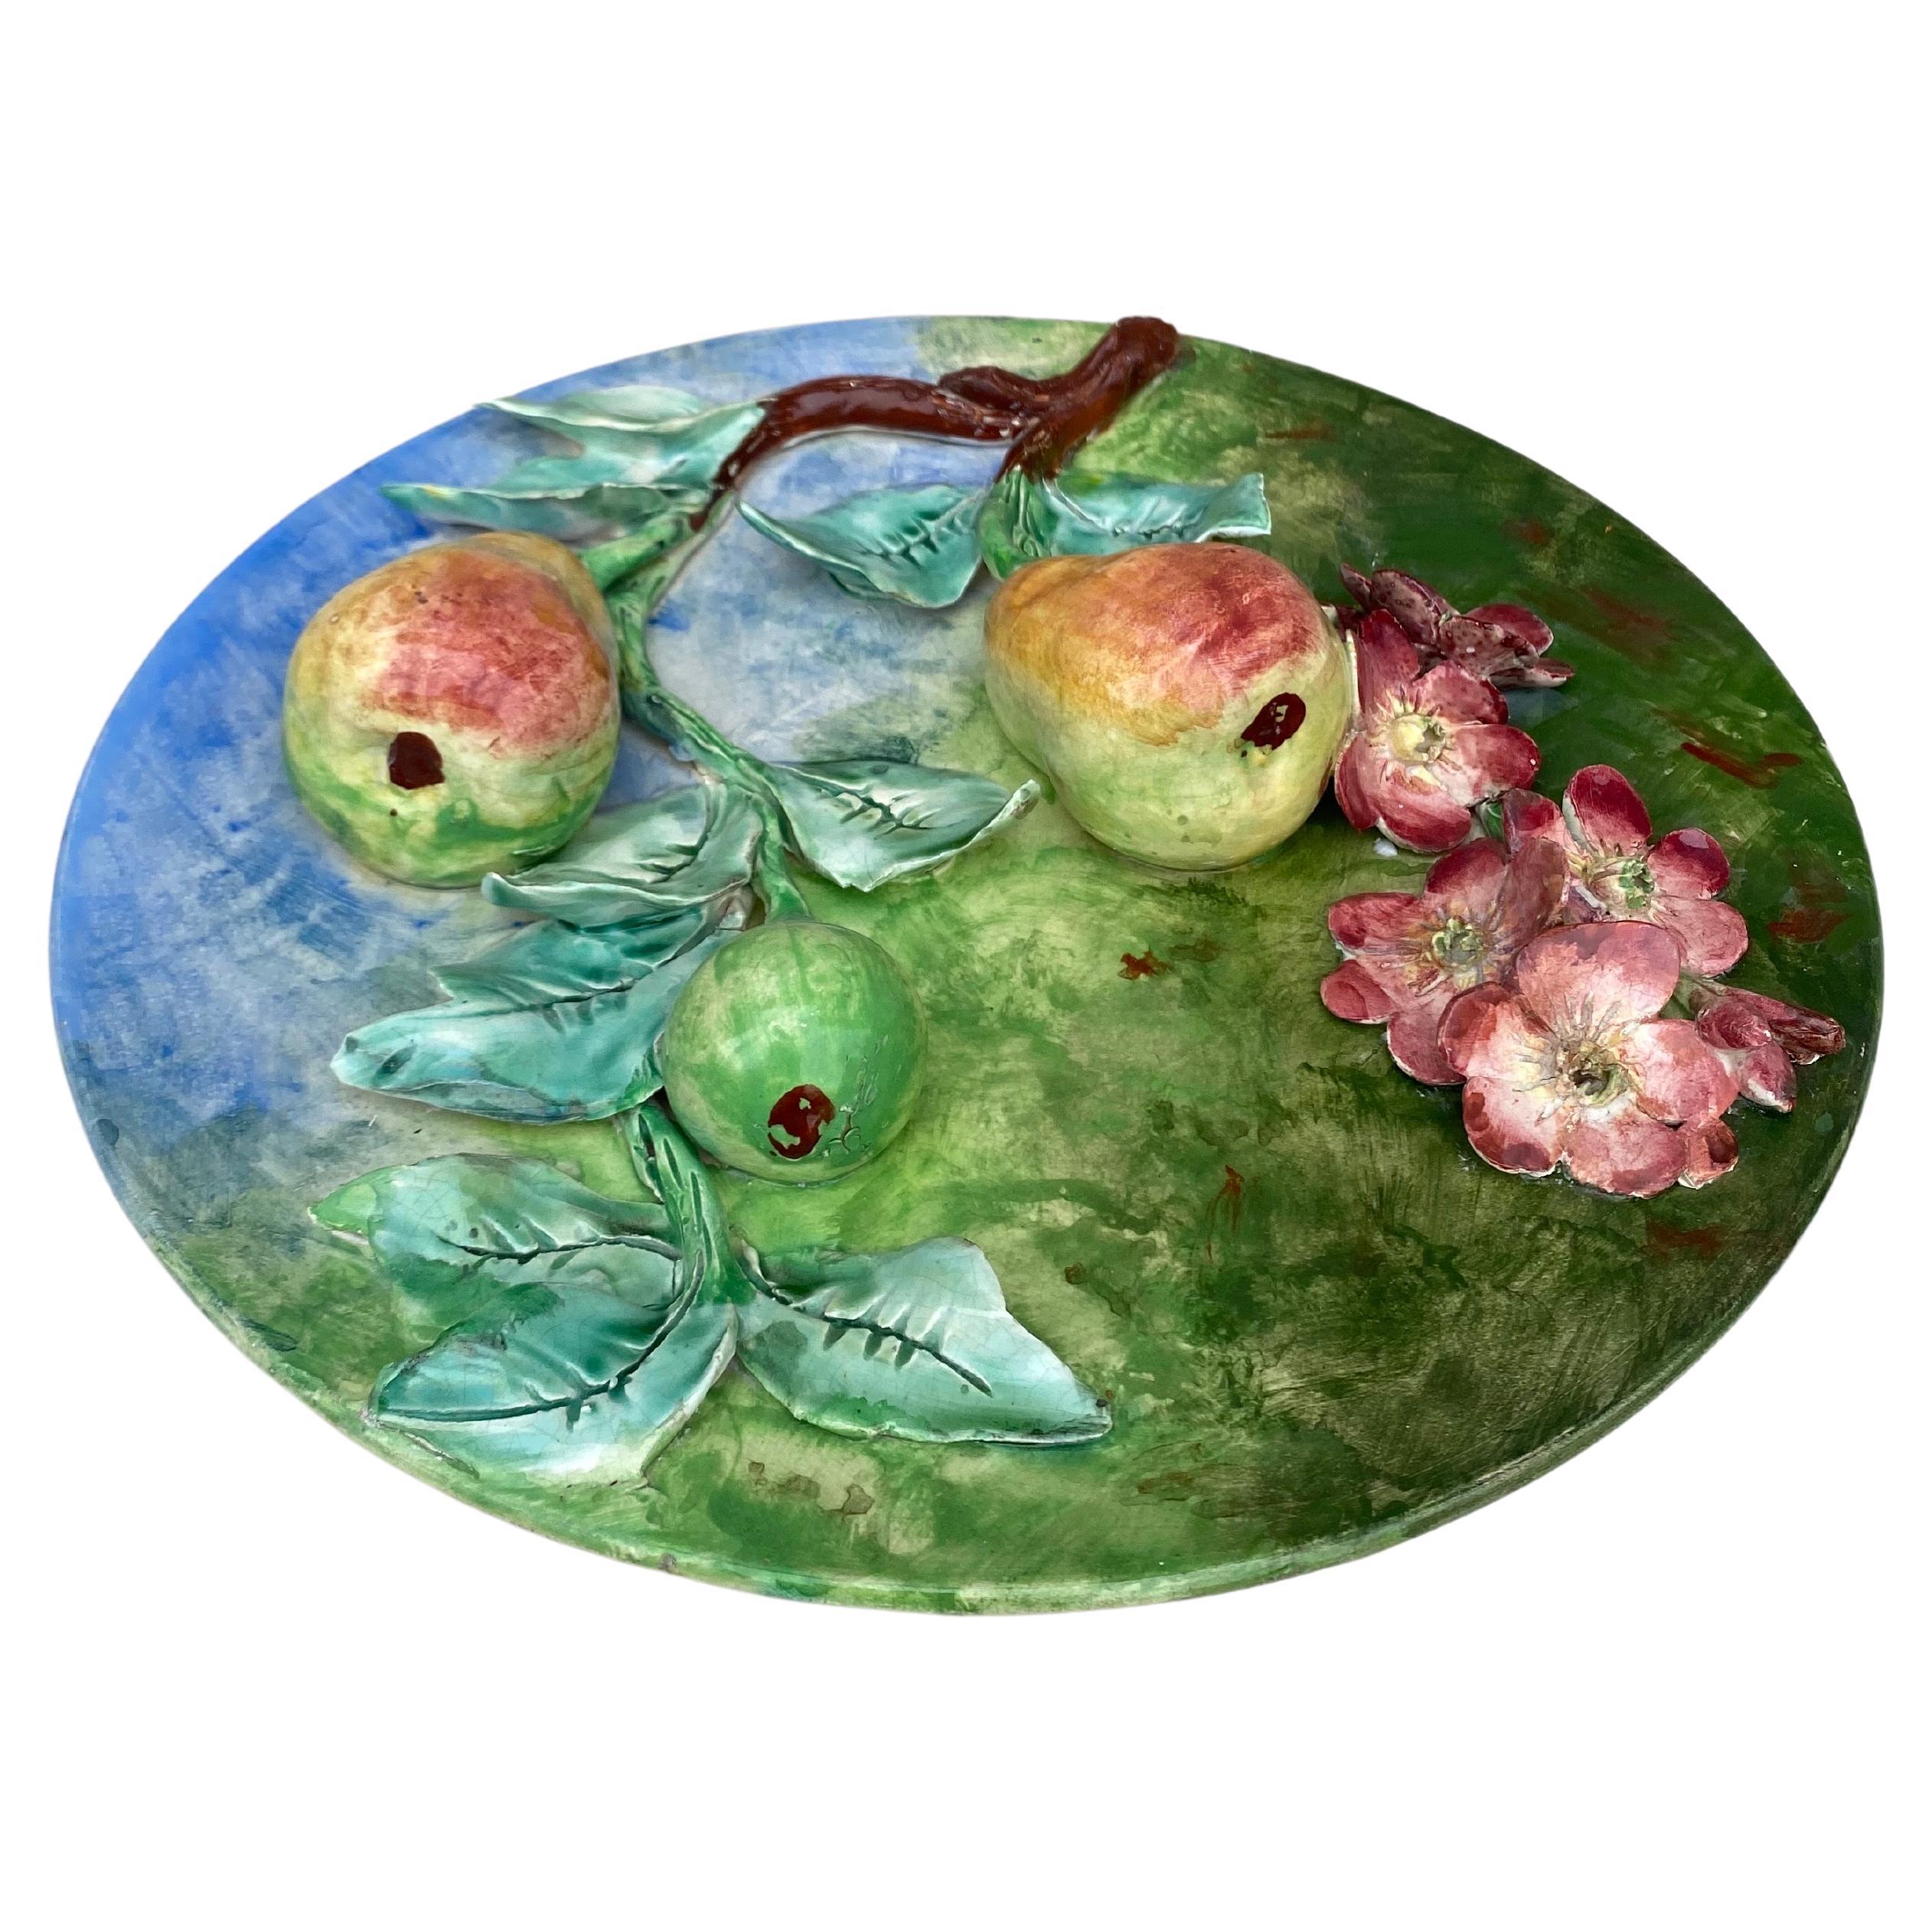 Colorful 19th century French Majolica pear wall platter signed Longchamp terre de fer. The fruits are in high relief with the leaves and branches.
The manufacture of Longchamp produced this fruits platters with various fruits in four different